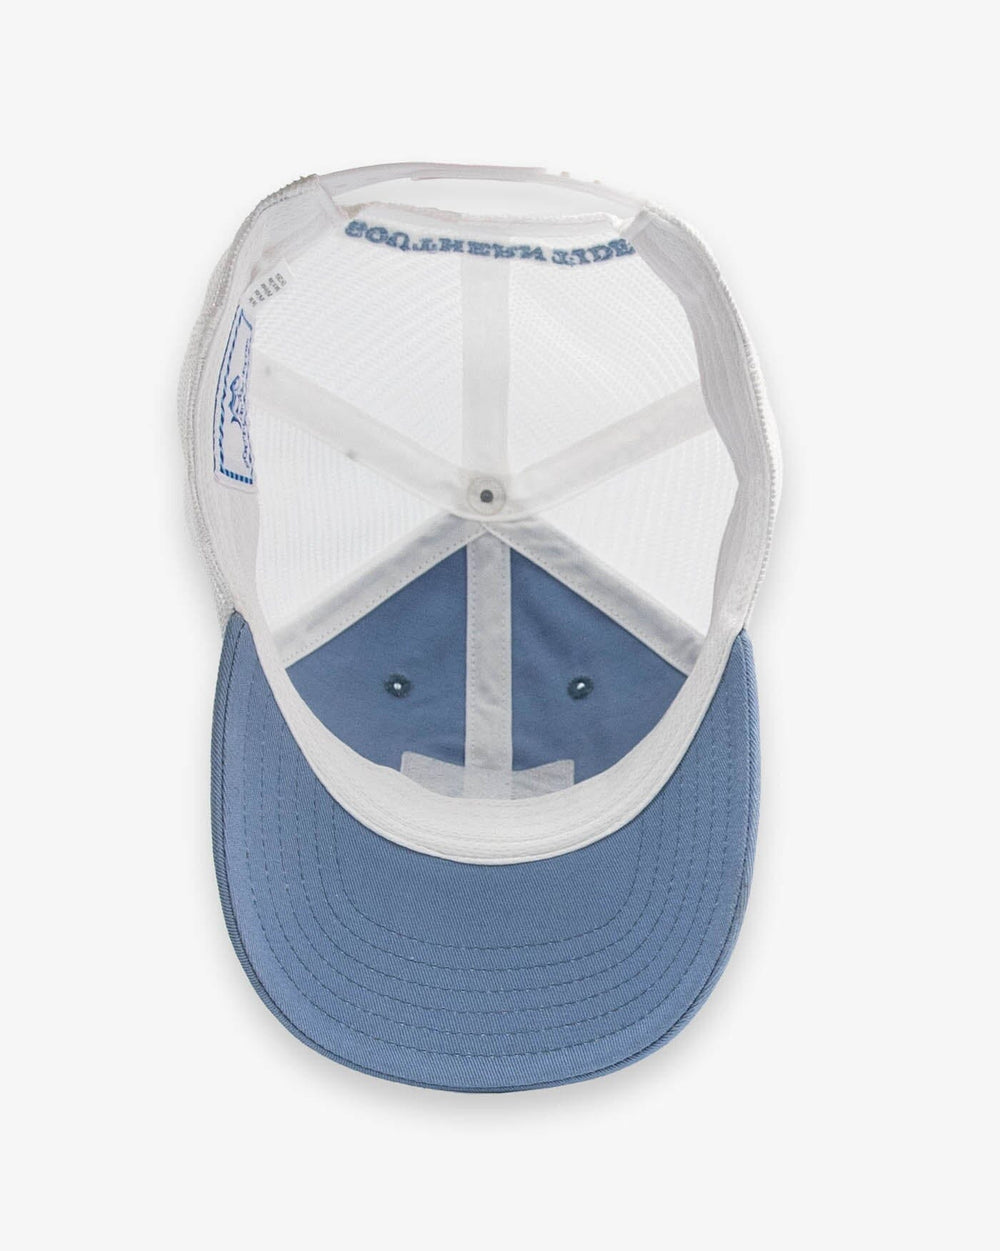 The detail view of the Southern Tide Sun Farer Skipjack Fly Patch Trucker Hat by Southern Tide - Subdued Blue